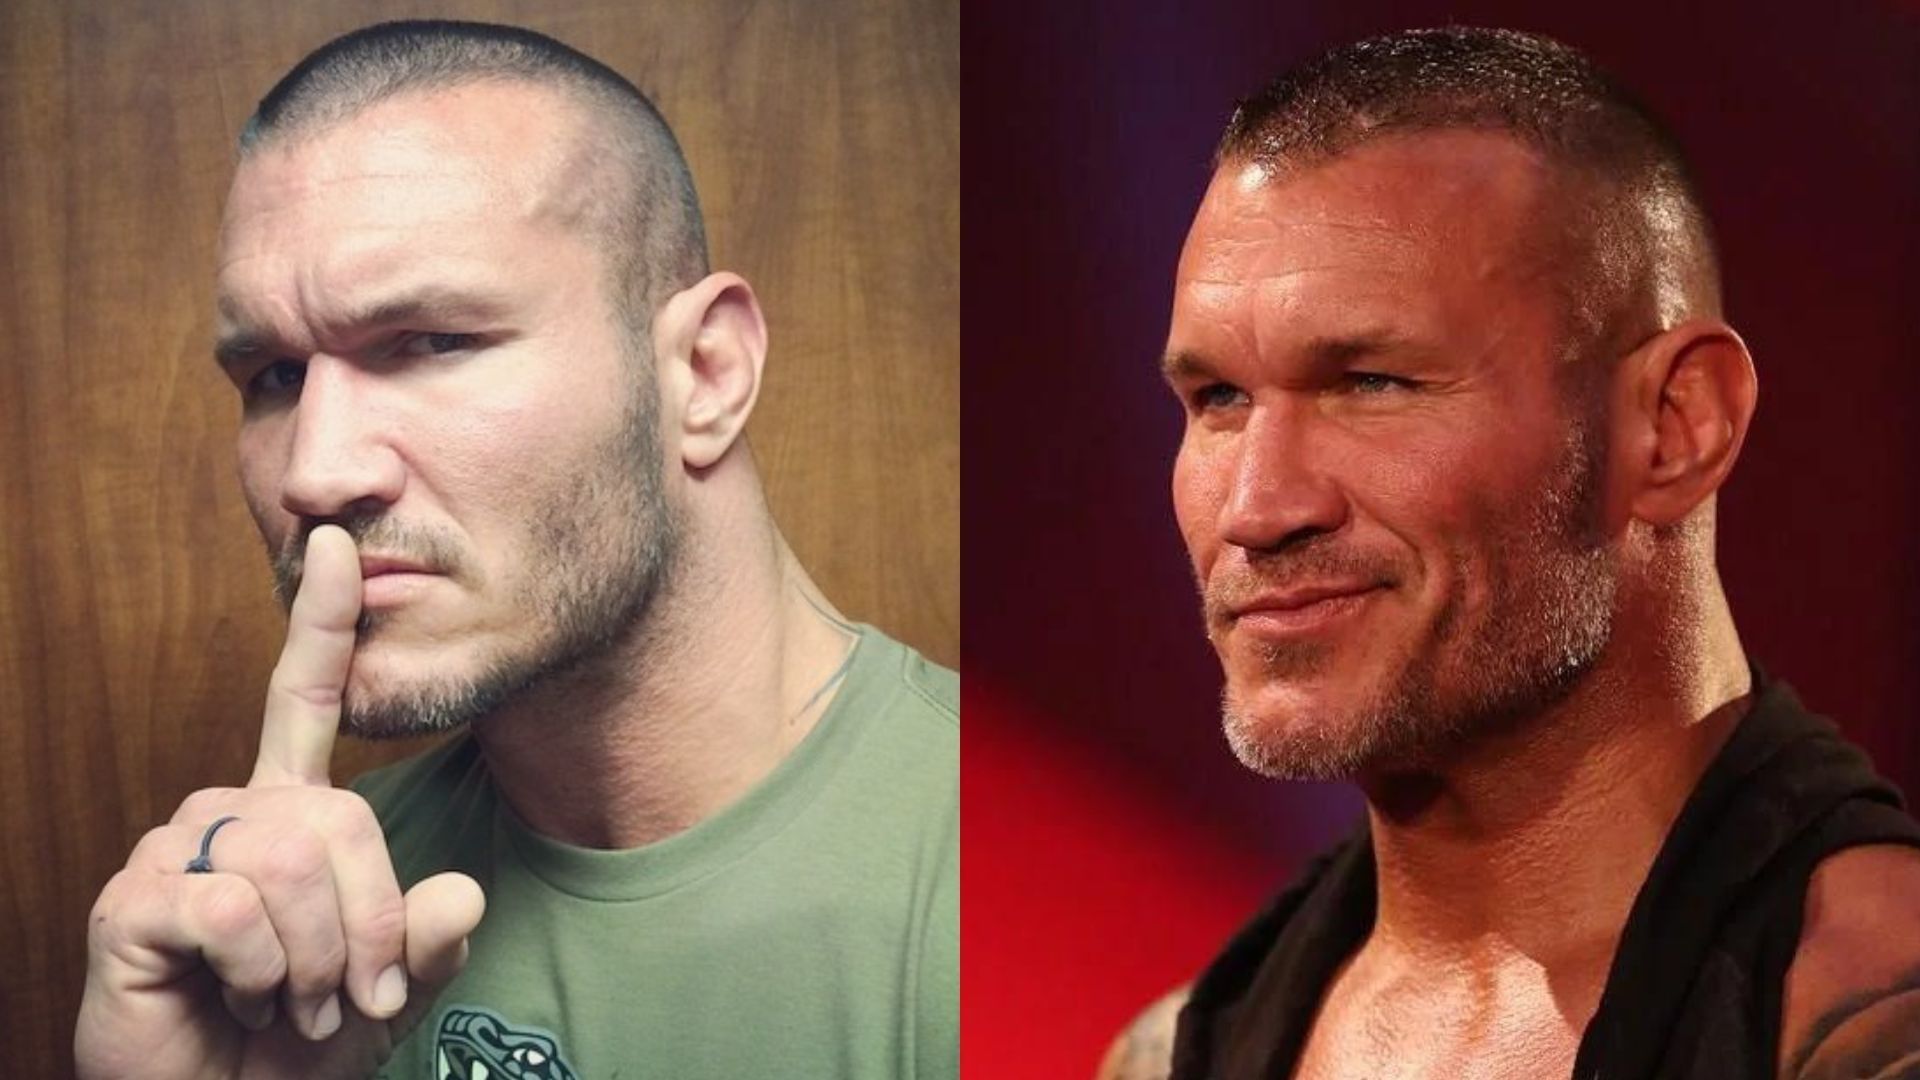 Orton has been out of action for over a year.